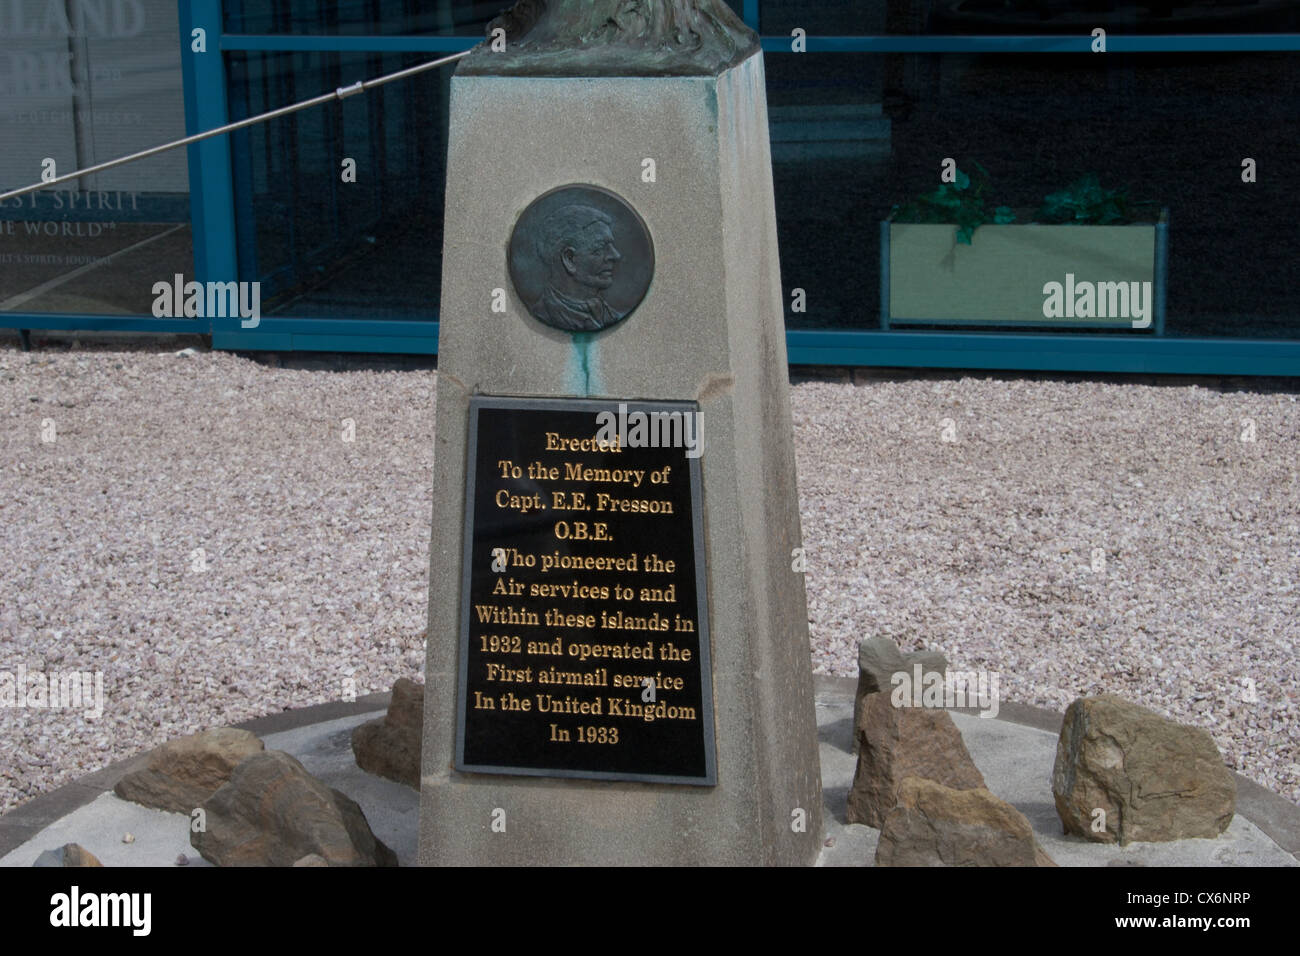 The plaque in front of Orkney airport stating that Capt EE Freeson pioneered air services to and within these islands in 1932. Stock Photo